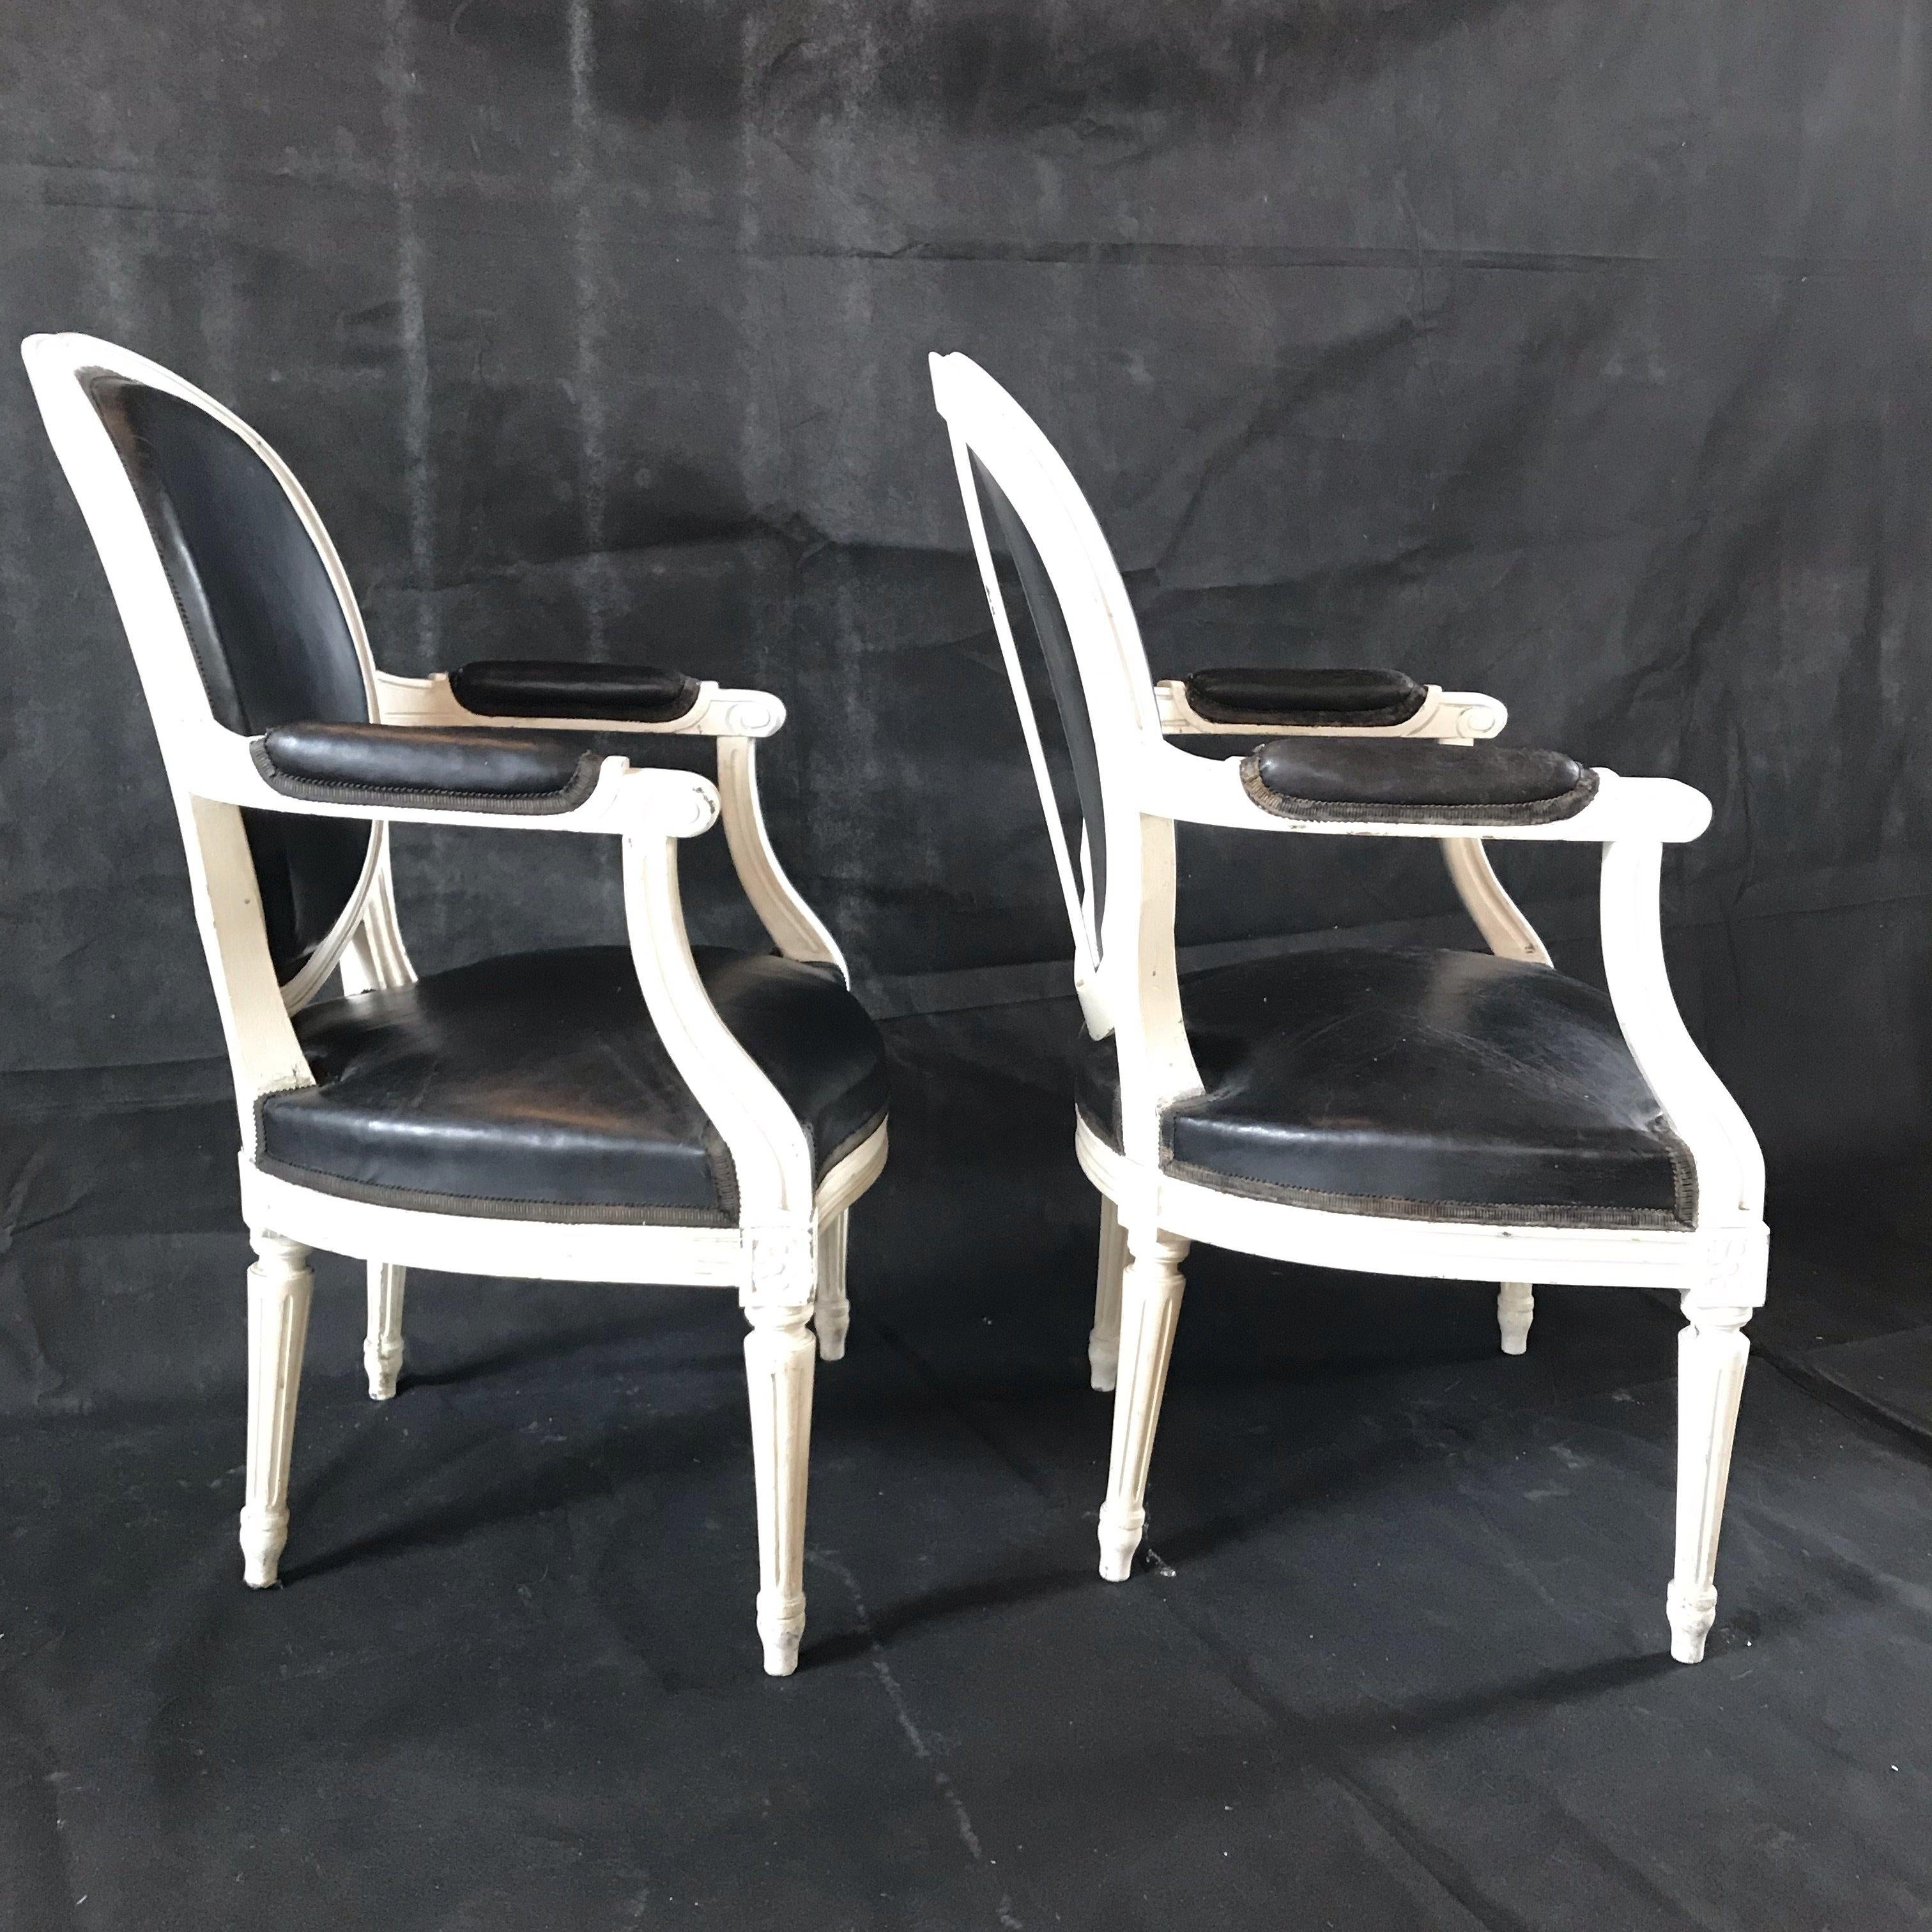 19th Century Pair of Classy Black Leather and White Painted Louis XVI Fauteuils Armchairs